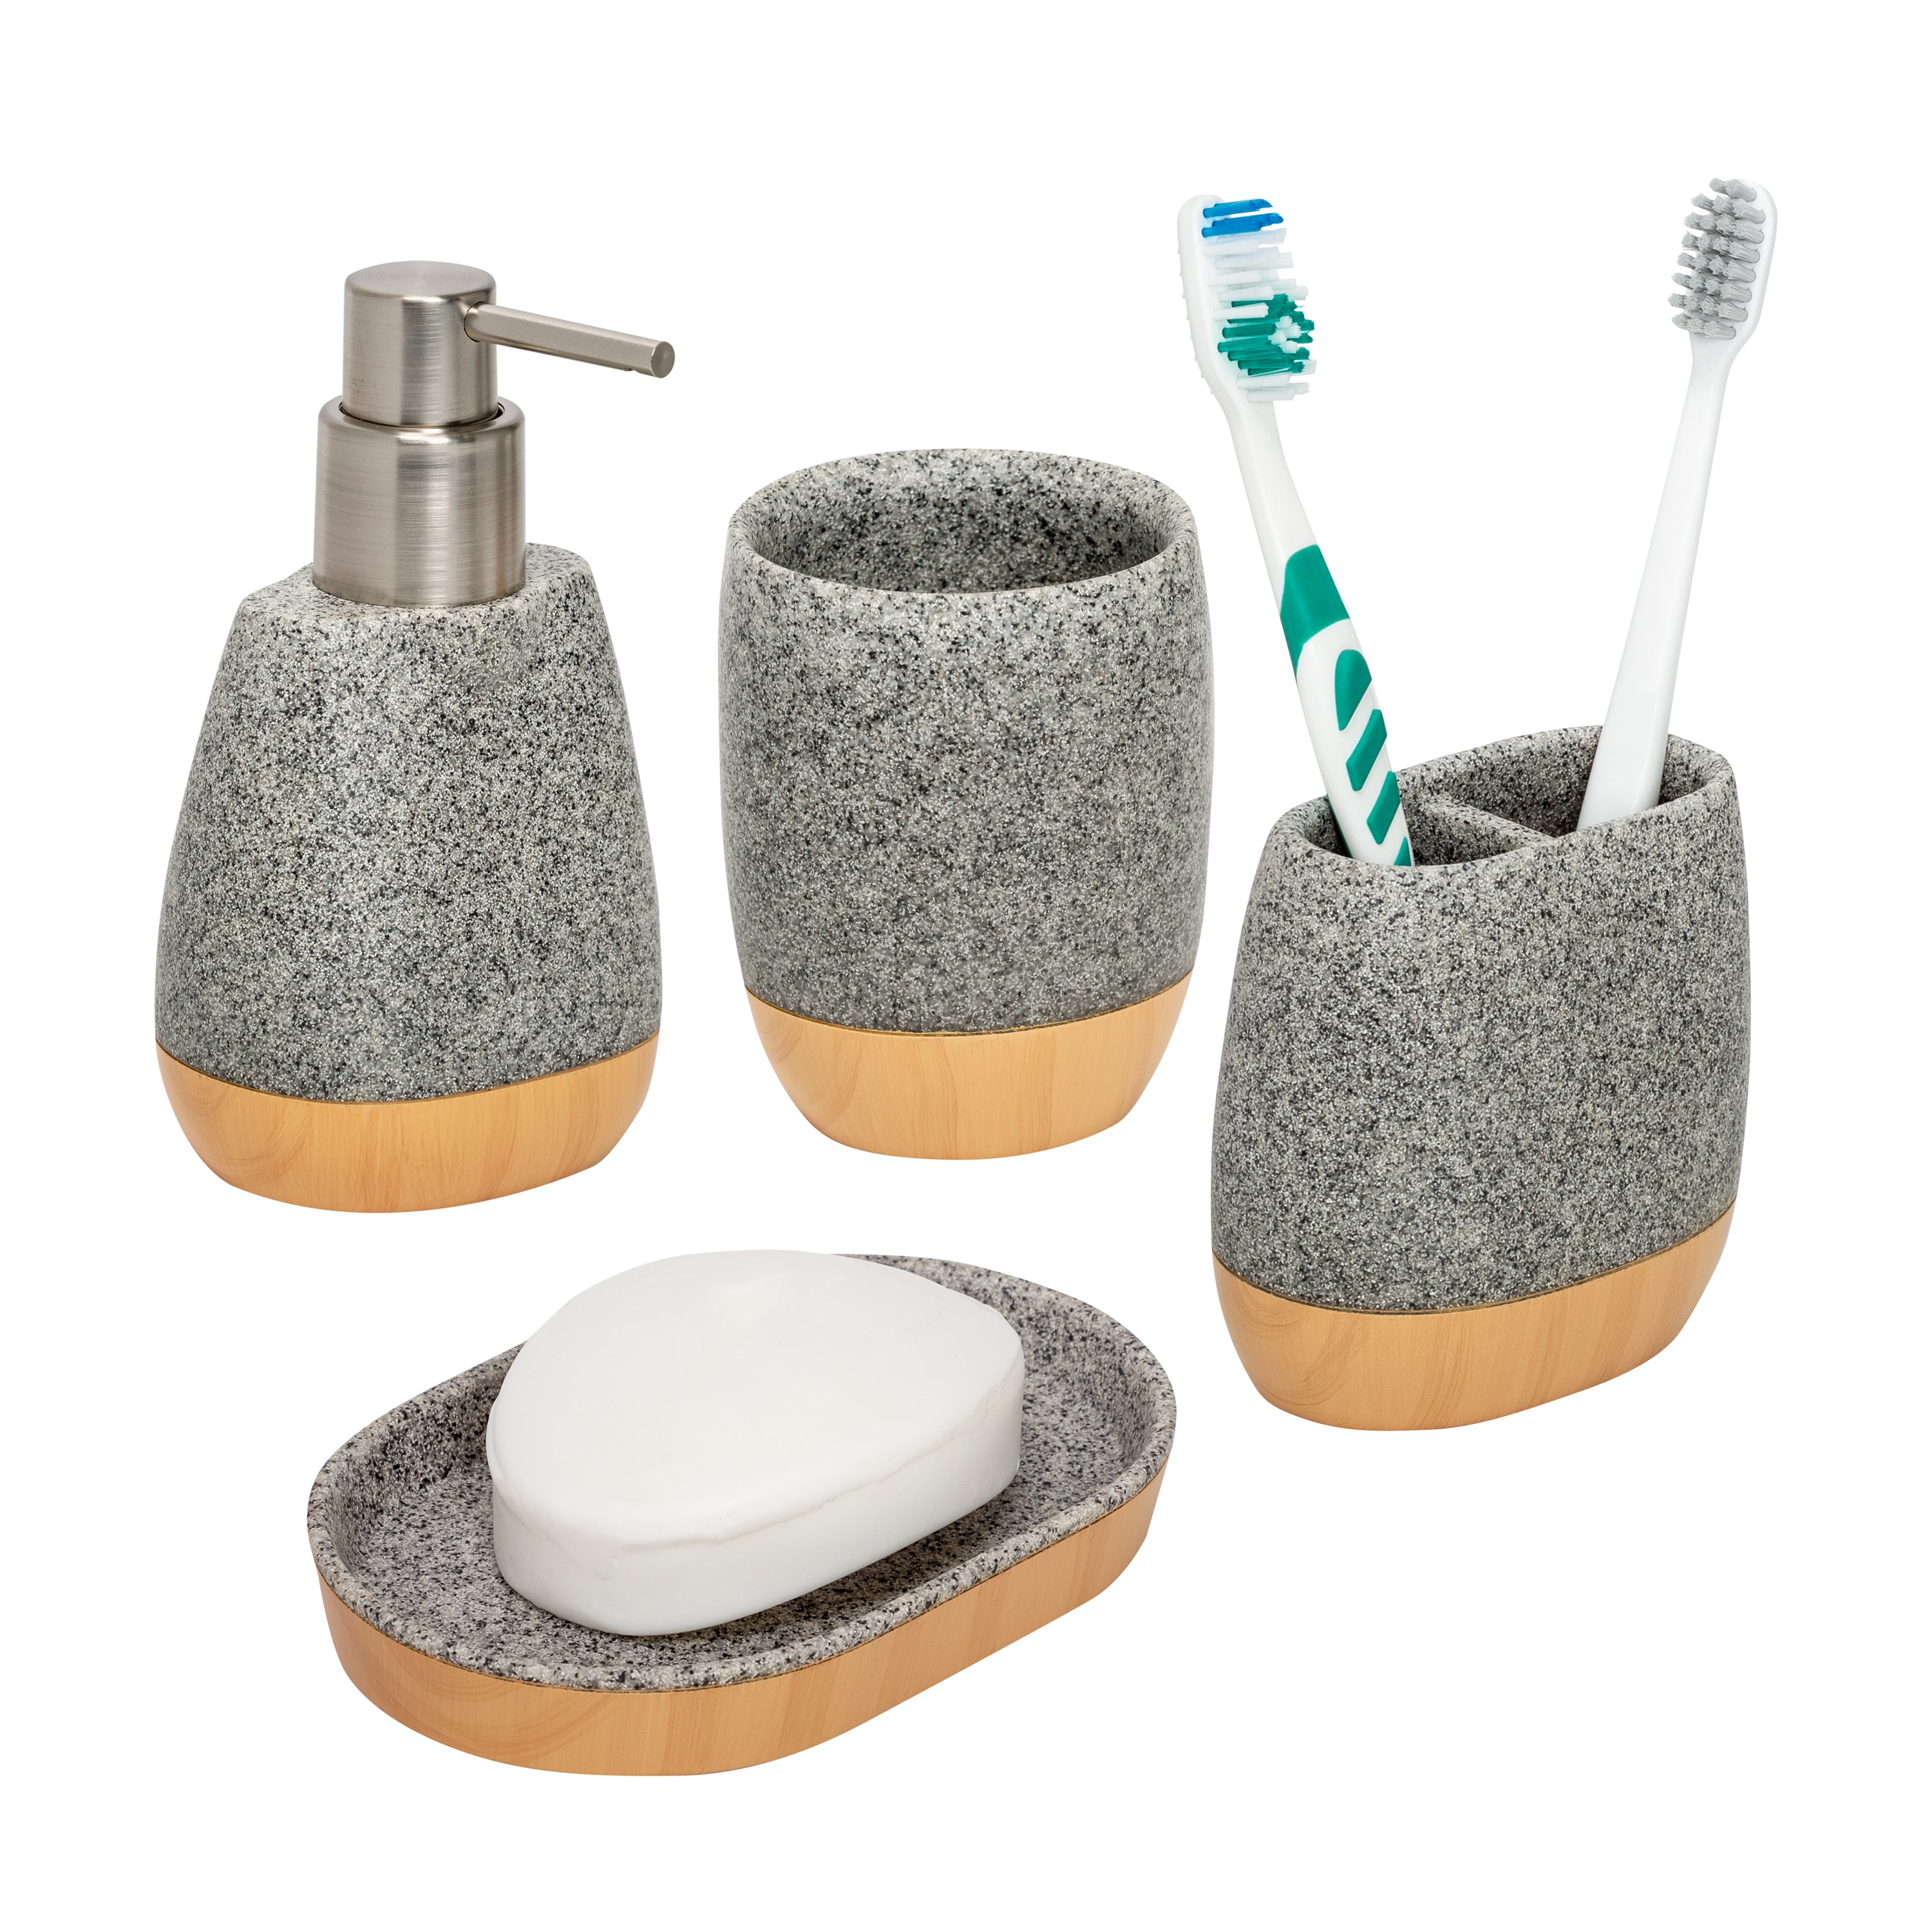 Soap Dishes in Bathroom Accessories 